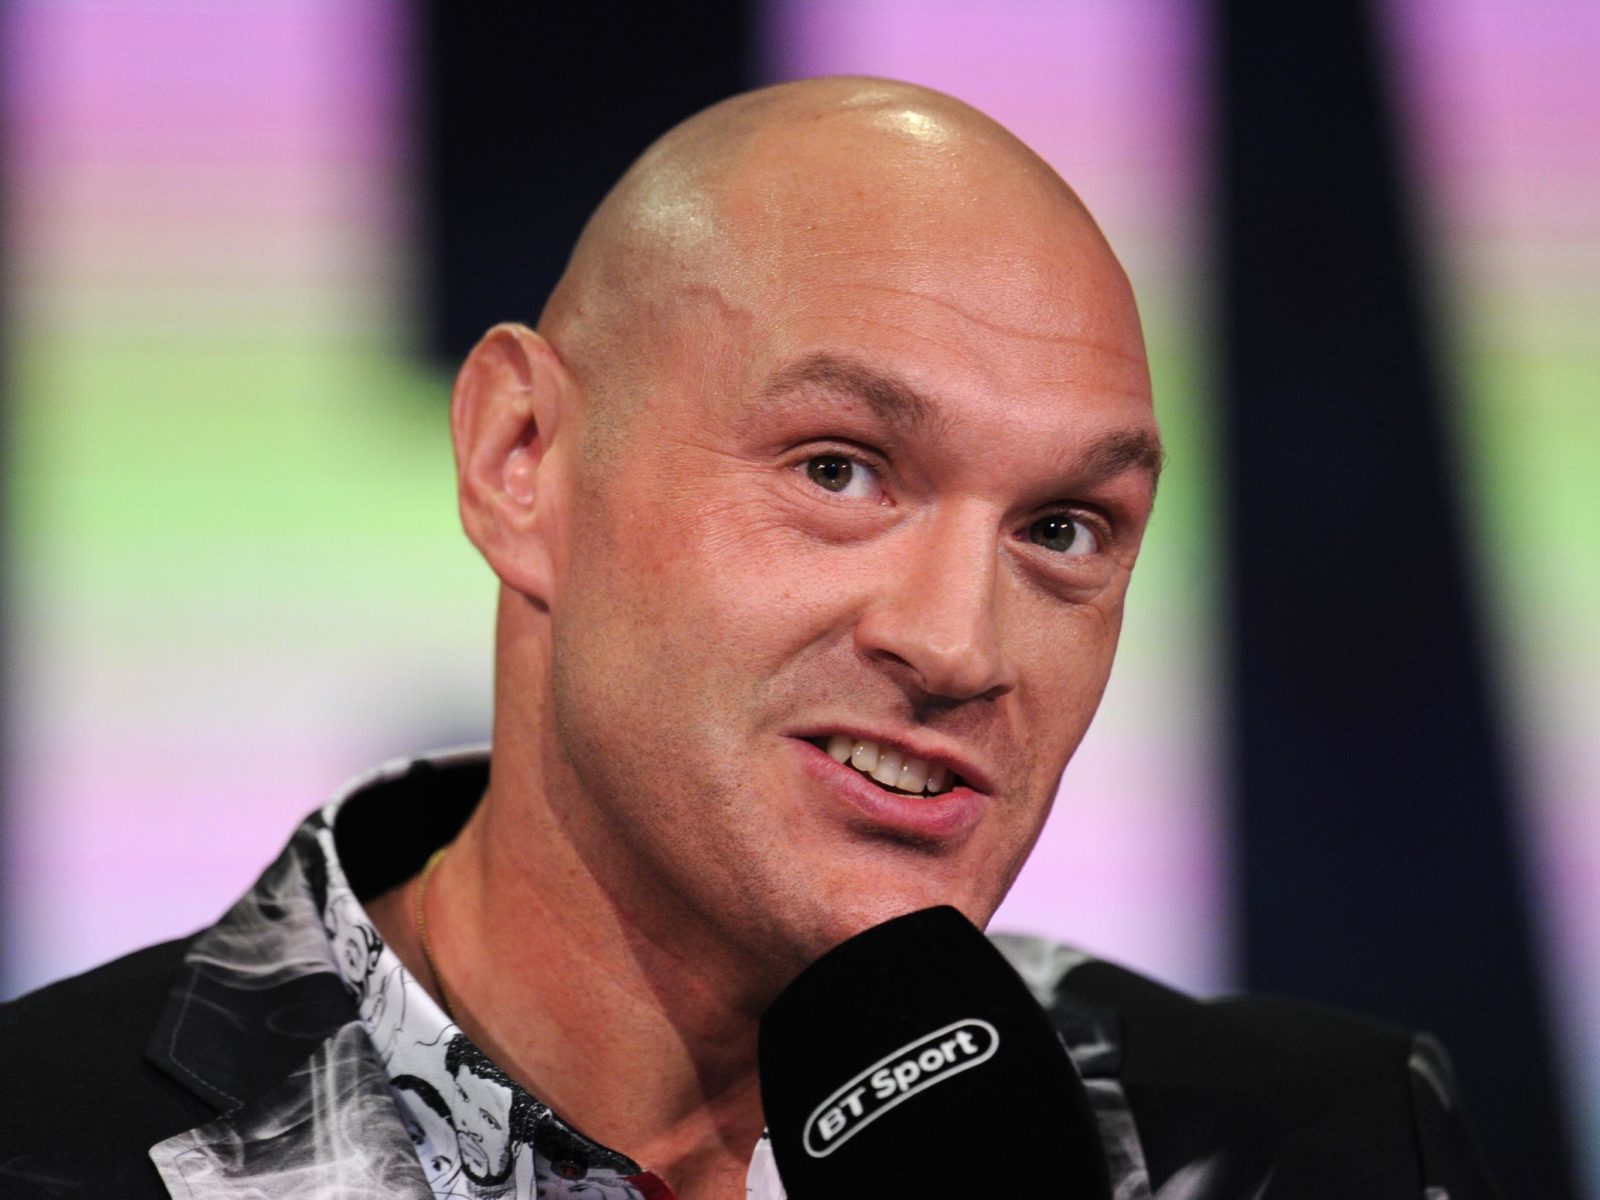 Tyson Fury during an interview for BT Sport